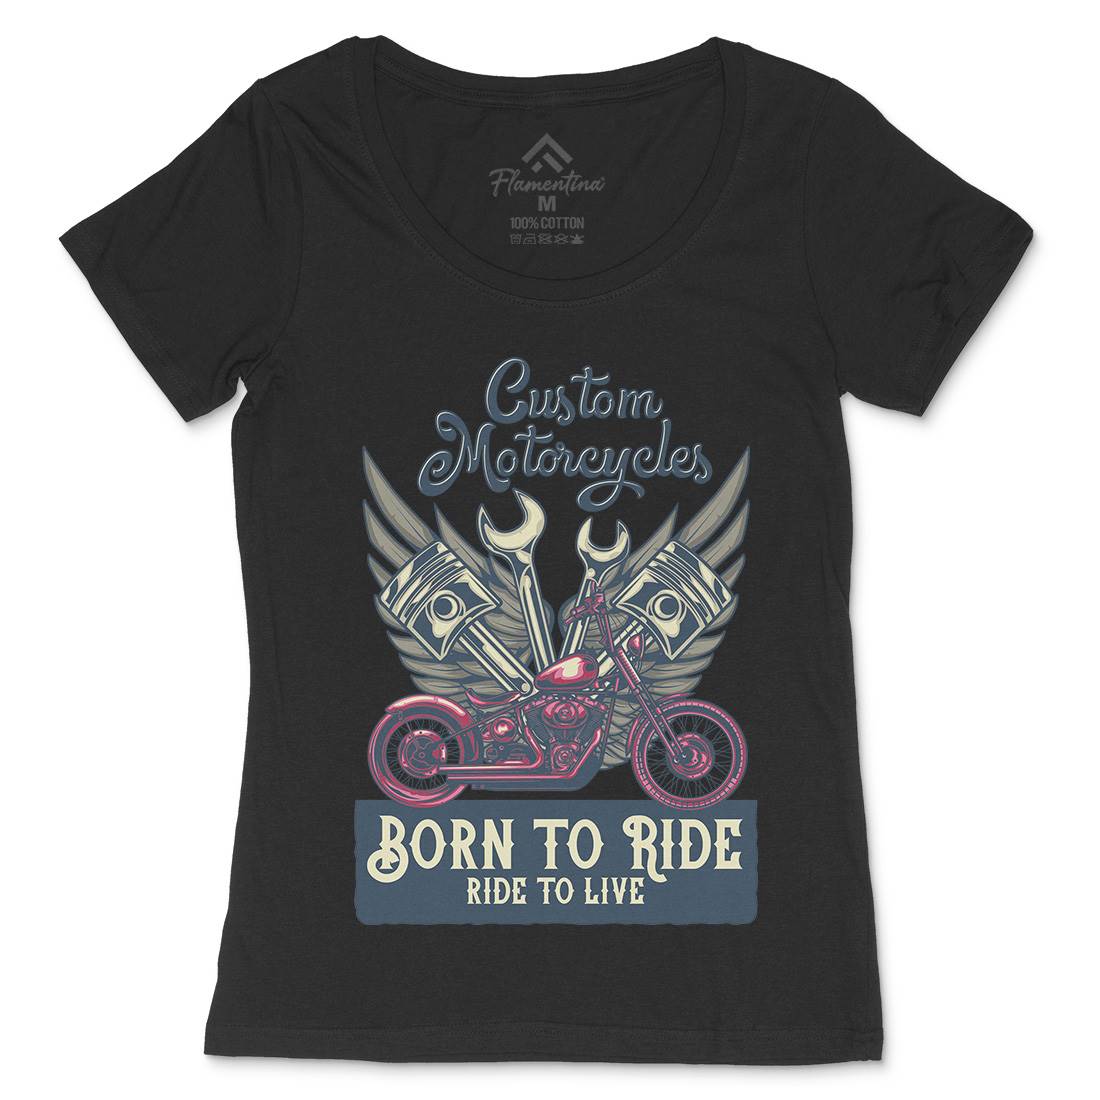 Born To Ride Womens Scoop Neck T-Shirt Motorcycles B143